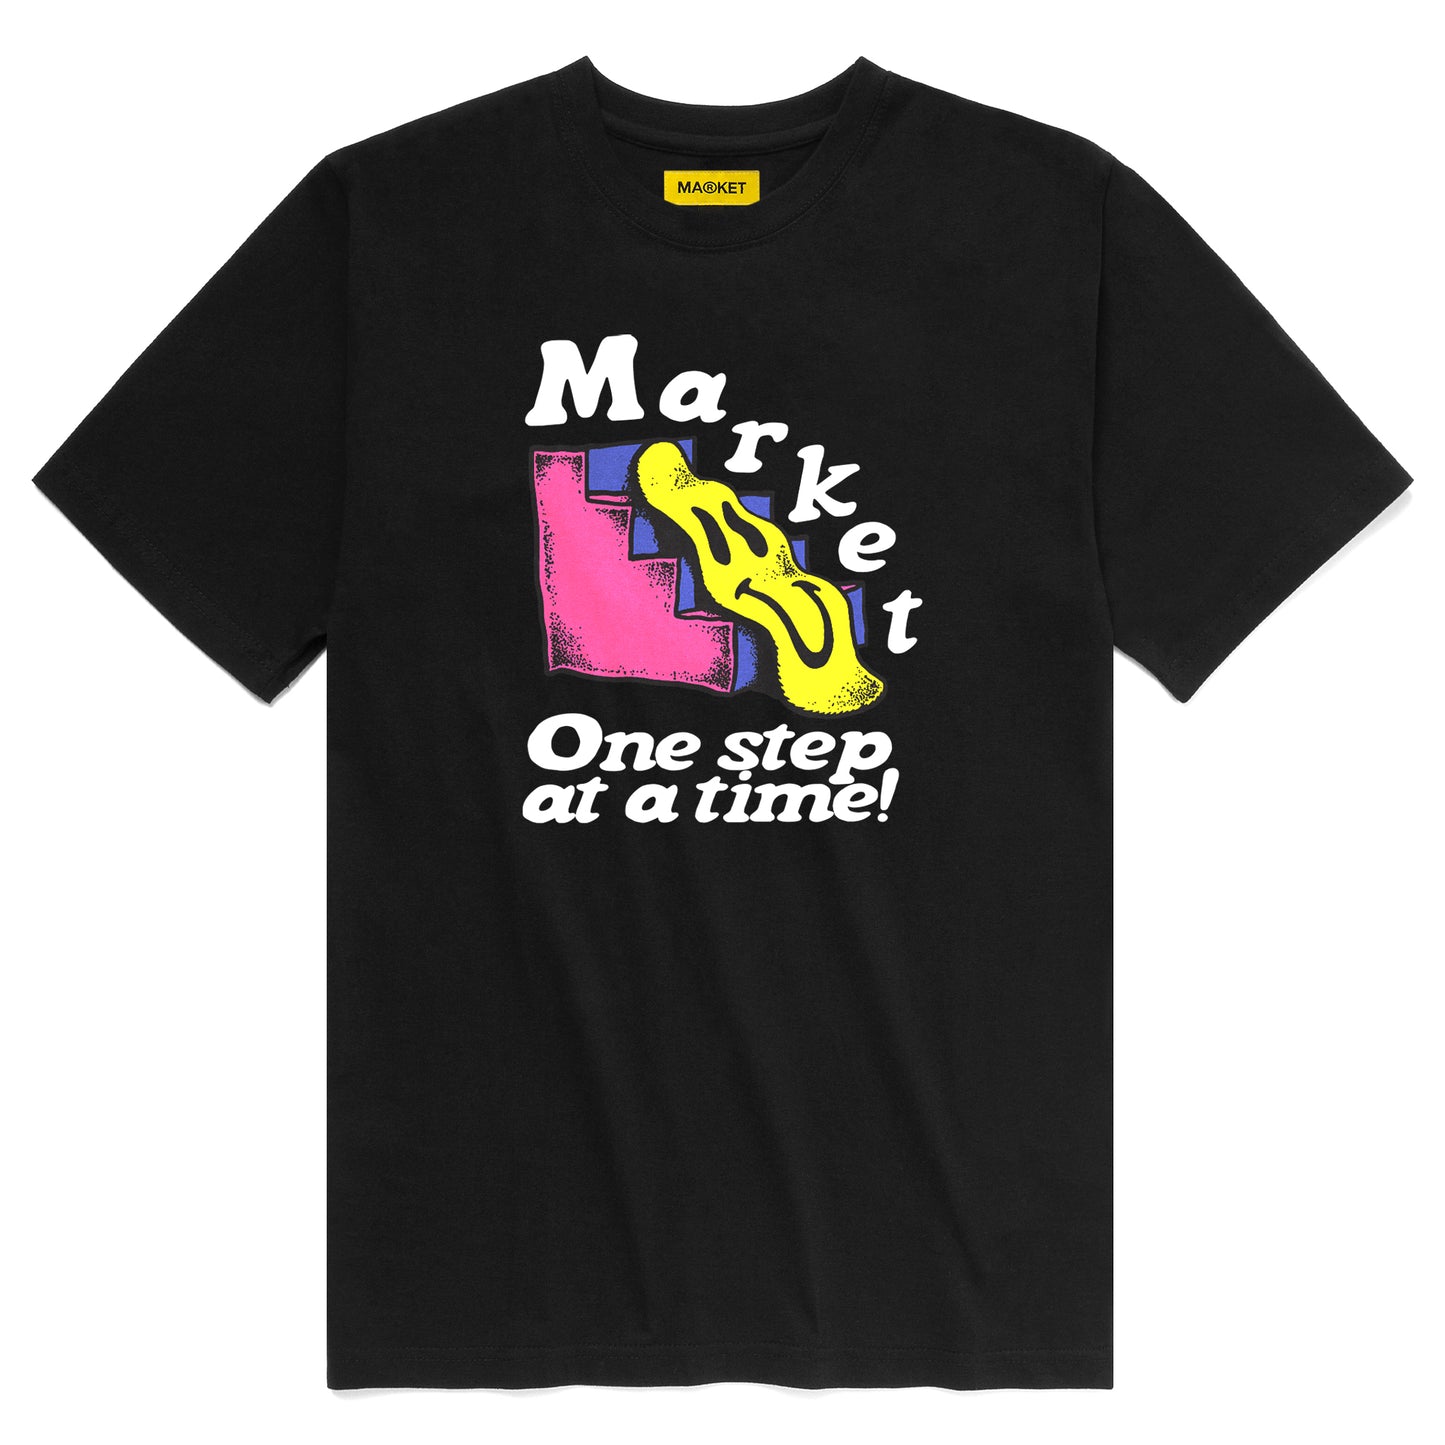 MARKET Smiley One Step At A Time T-Shirt